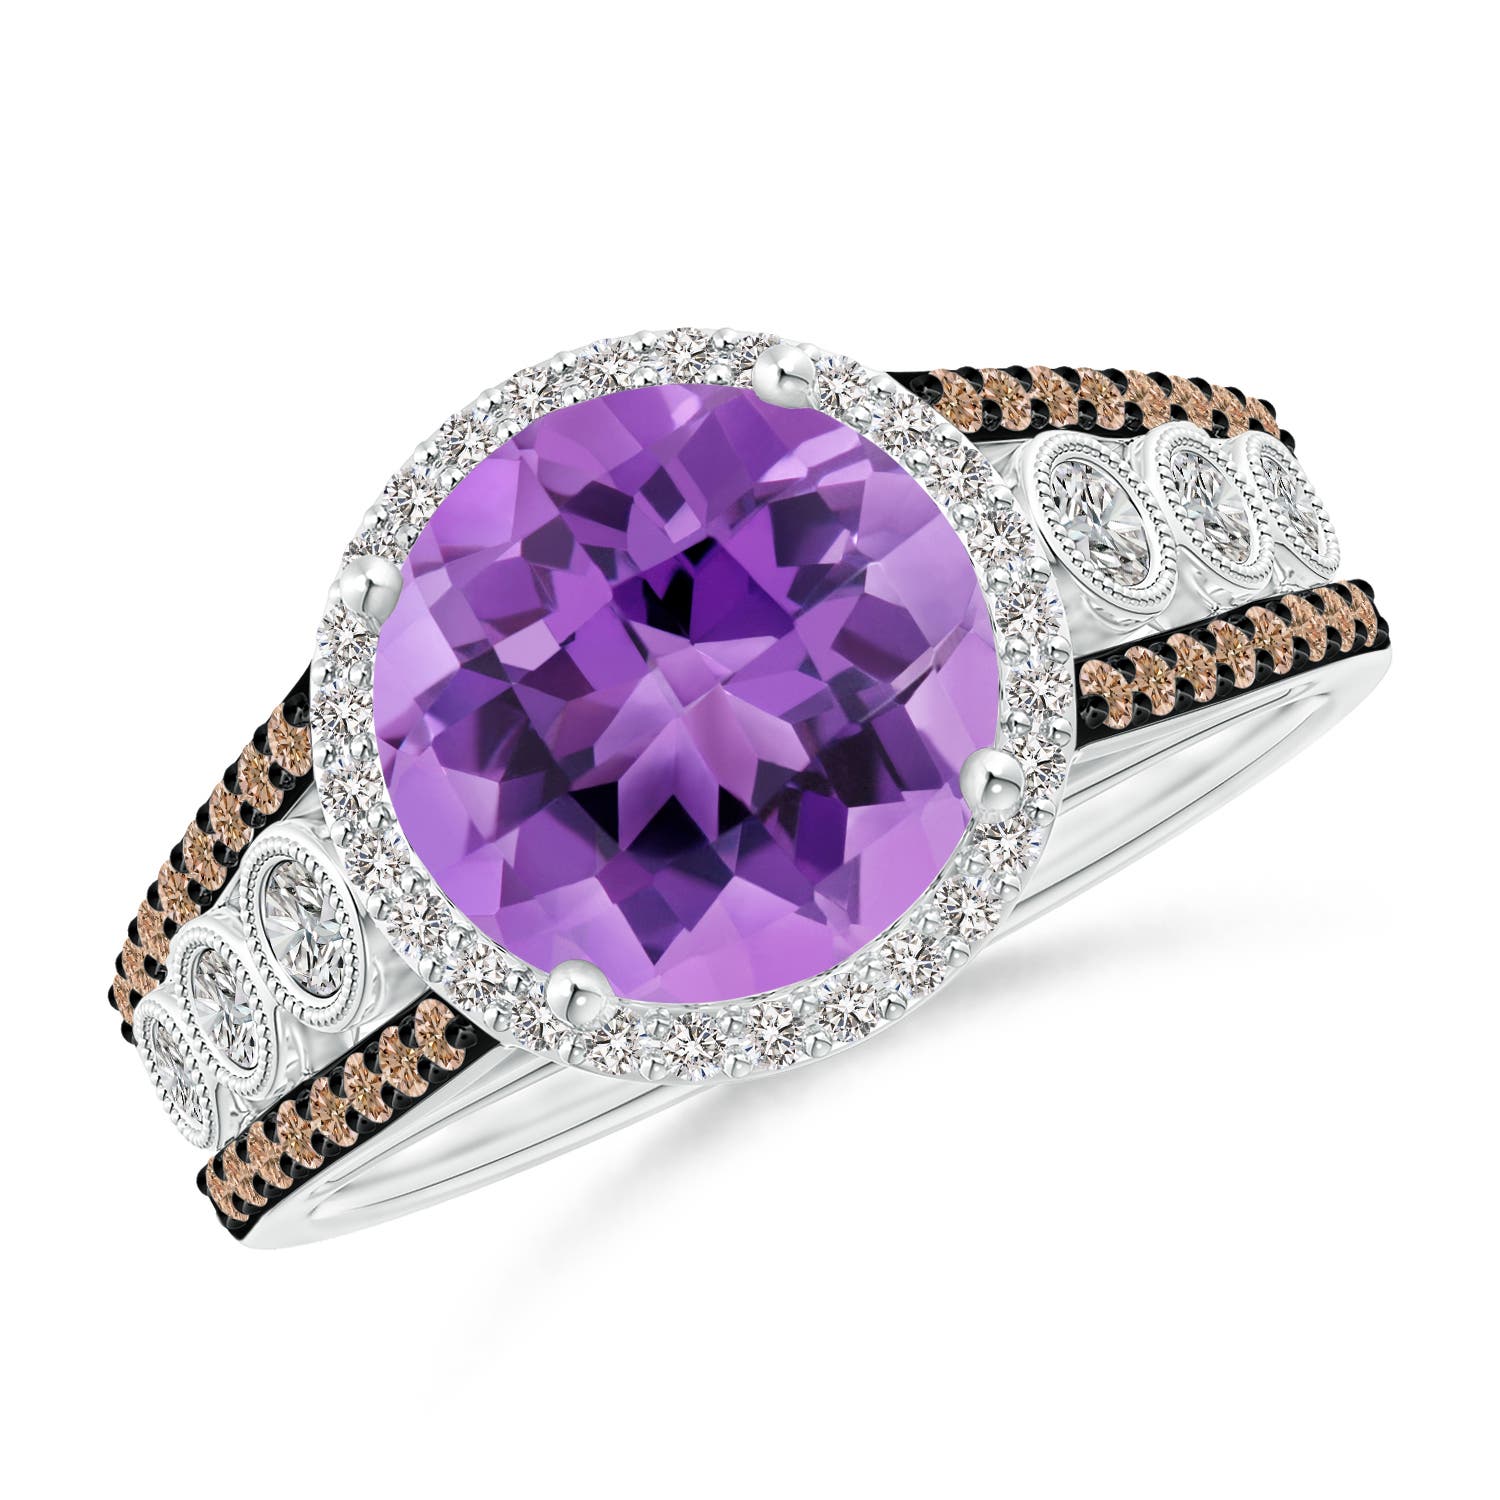 AA - Amethyst / 2.64 CT / 14 KT White Gold